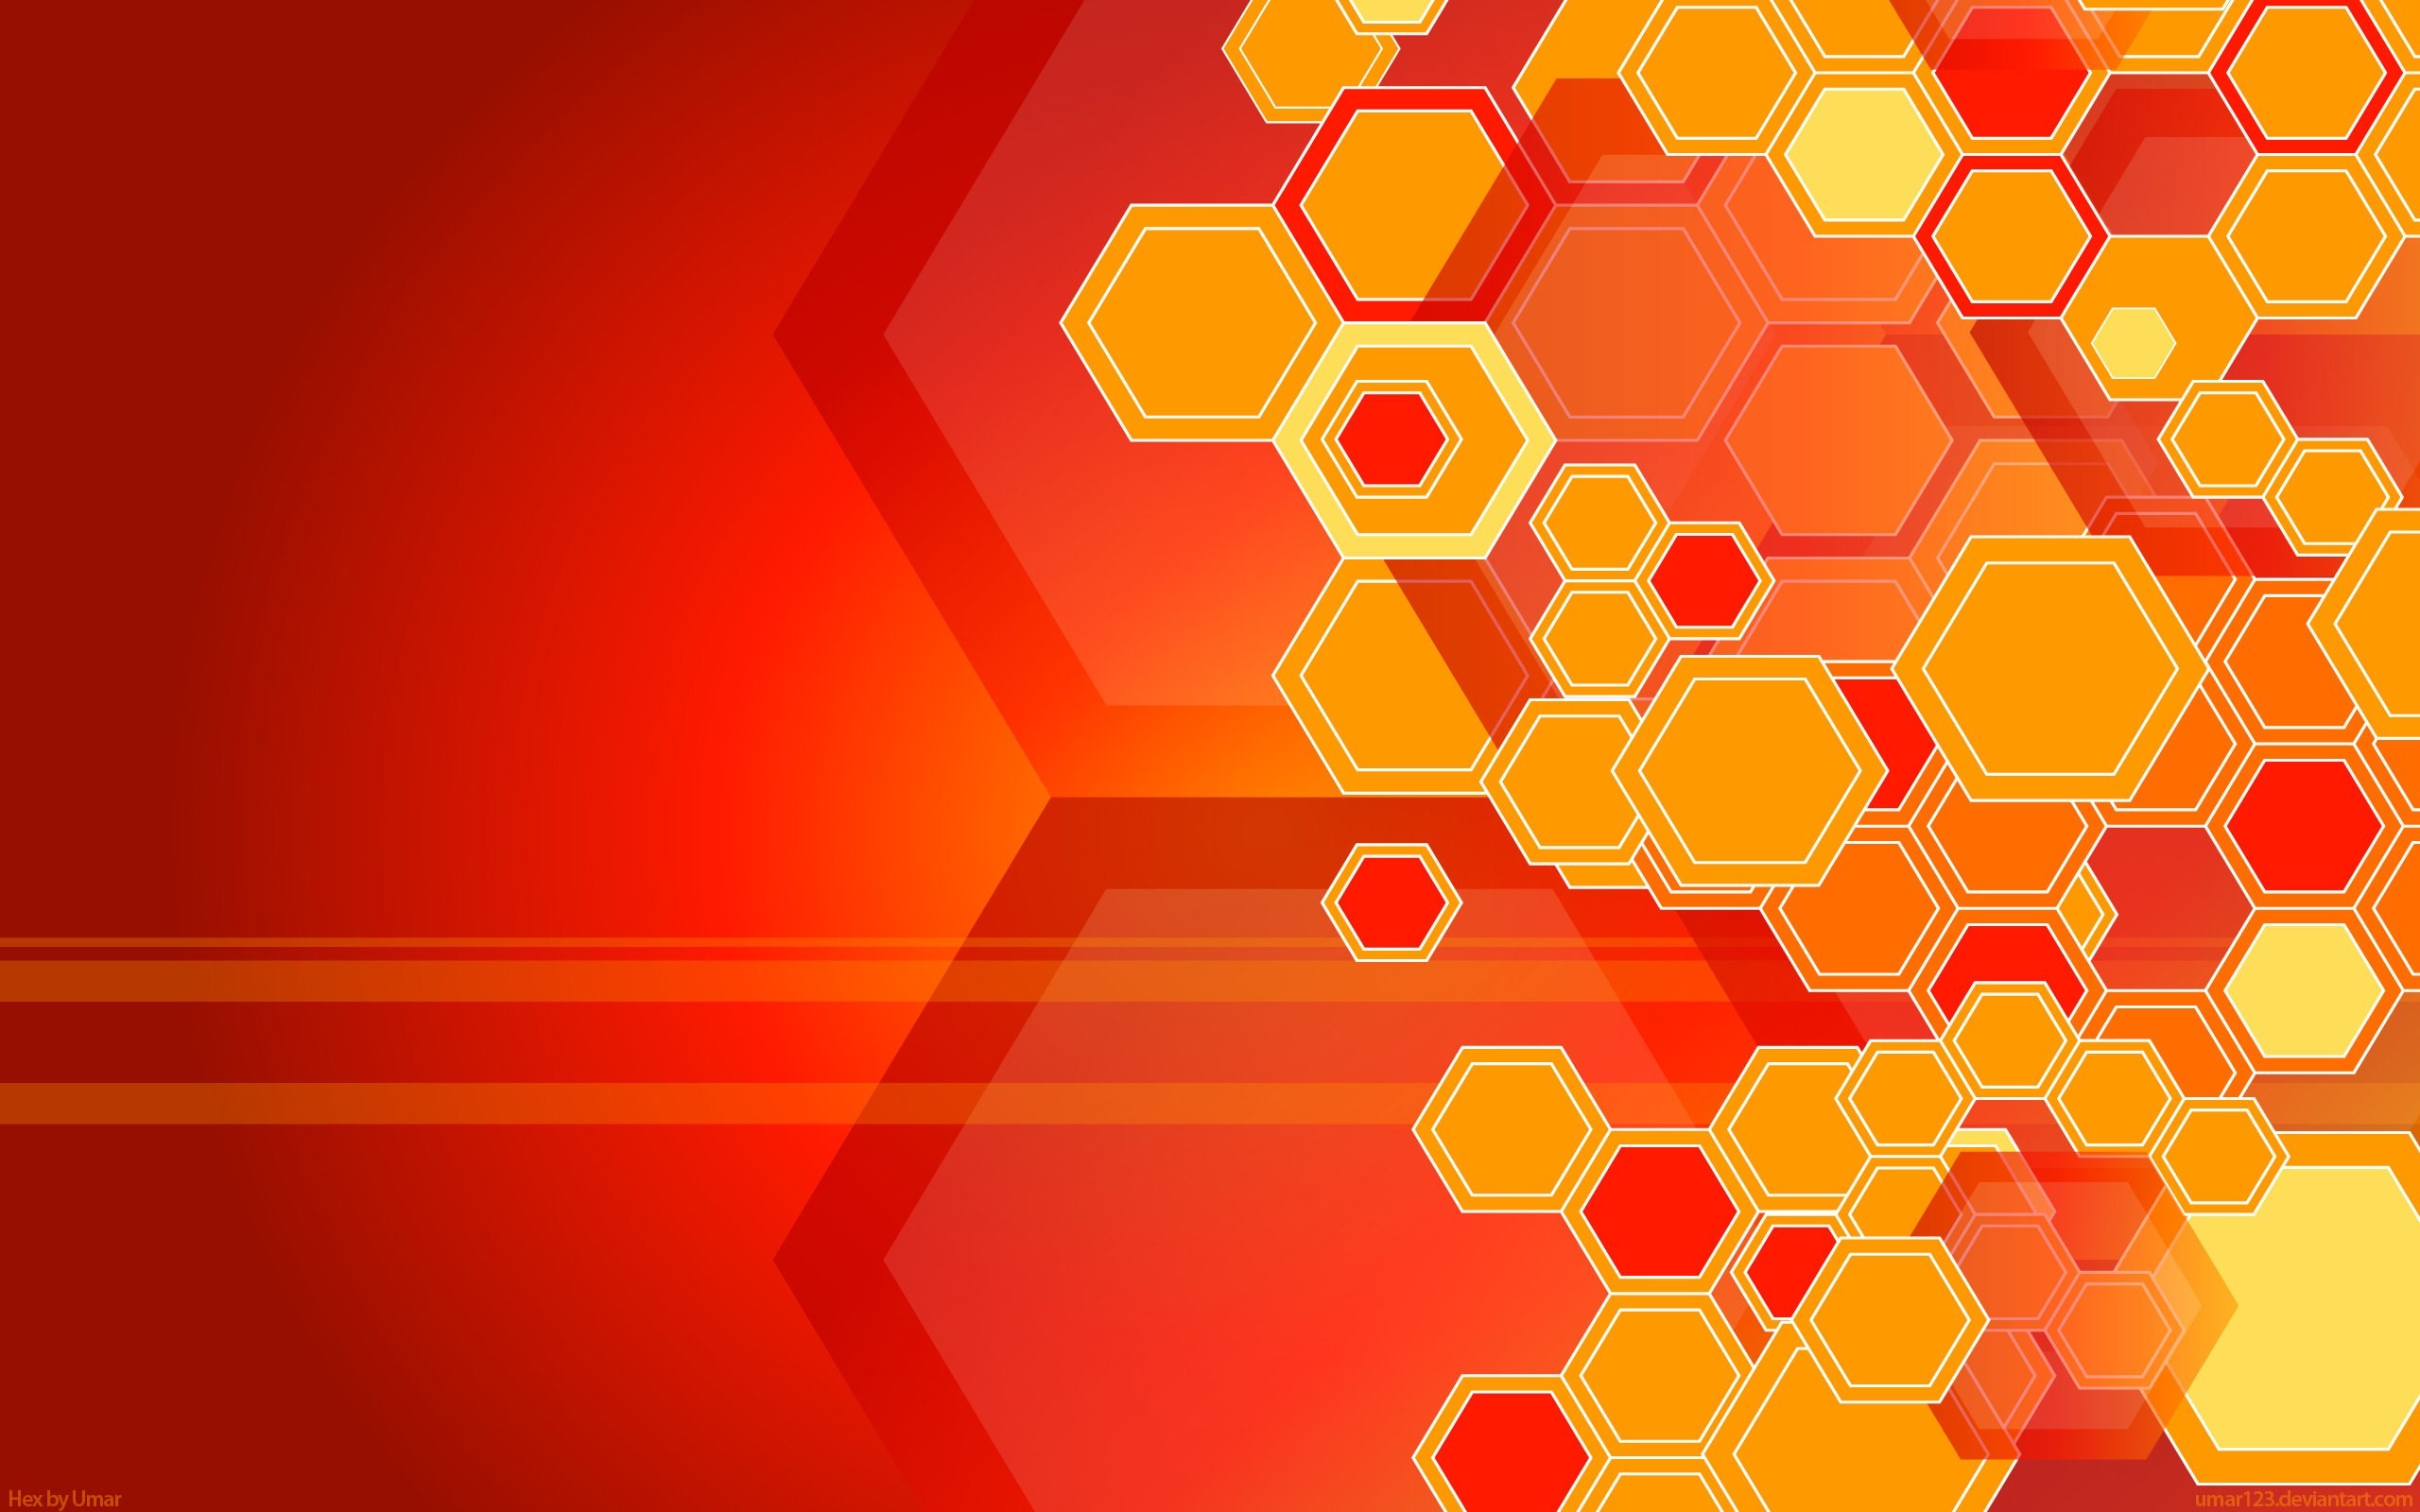 2560x1600 This hexagon shape abstract wallpaper will be a good material for your  graphic design project on Photoshop. You can also use this image for your  PC desktop